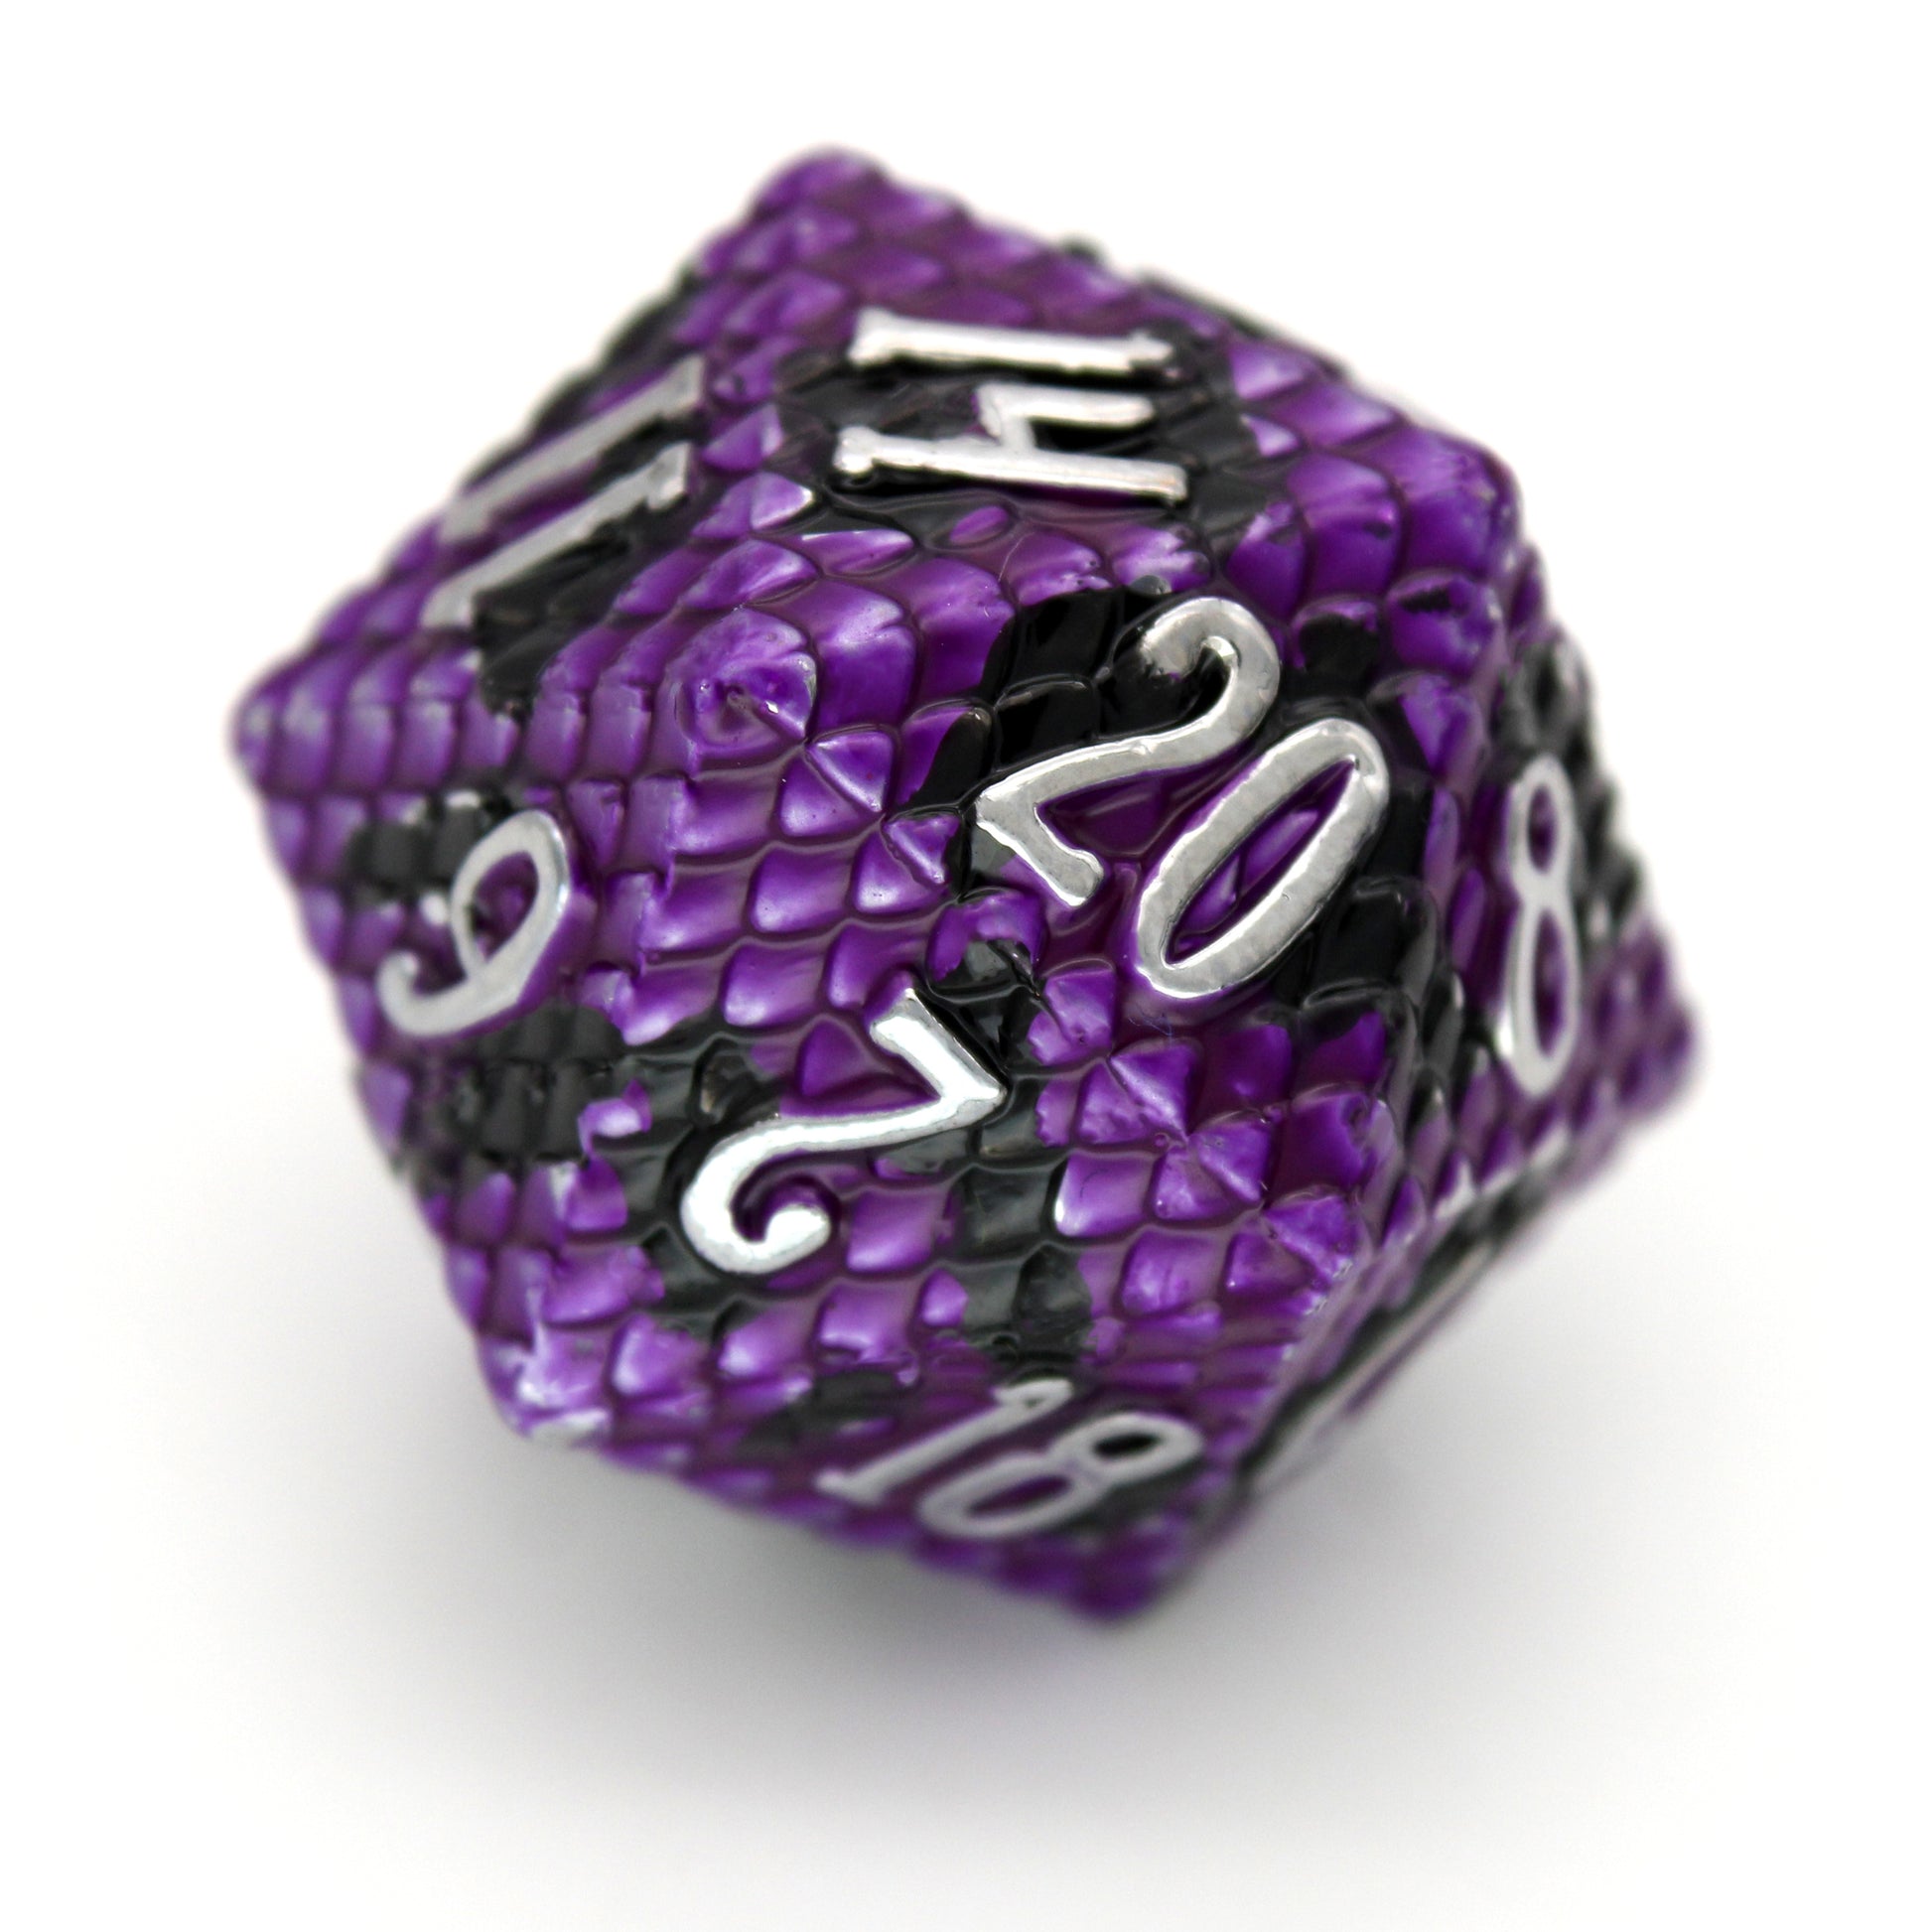 Deep Dragon is a 7-piece purple and black scaled metal set with cool silver numbering.